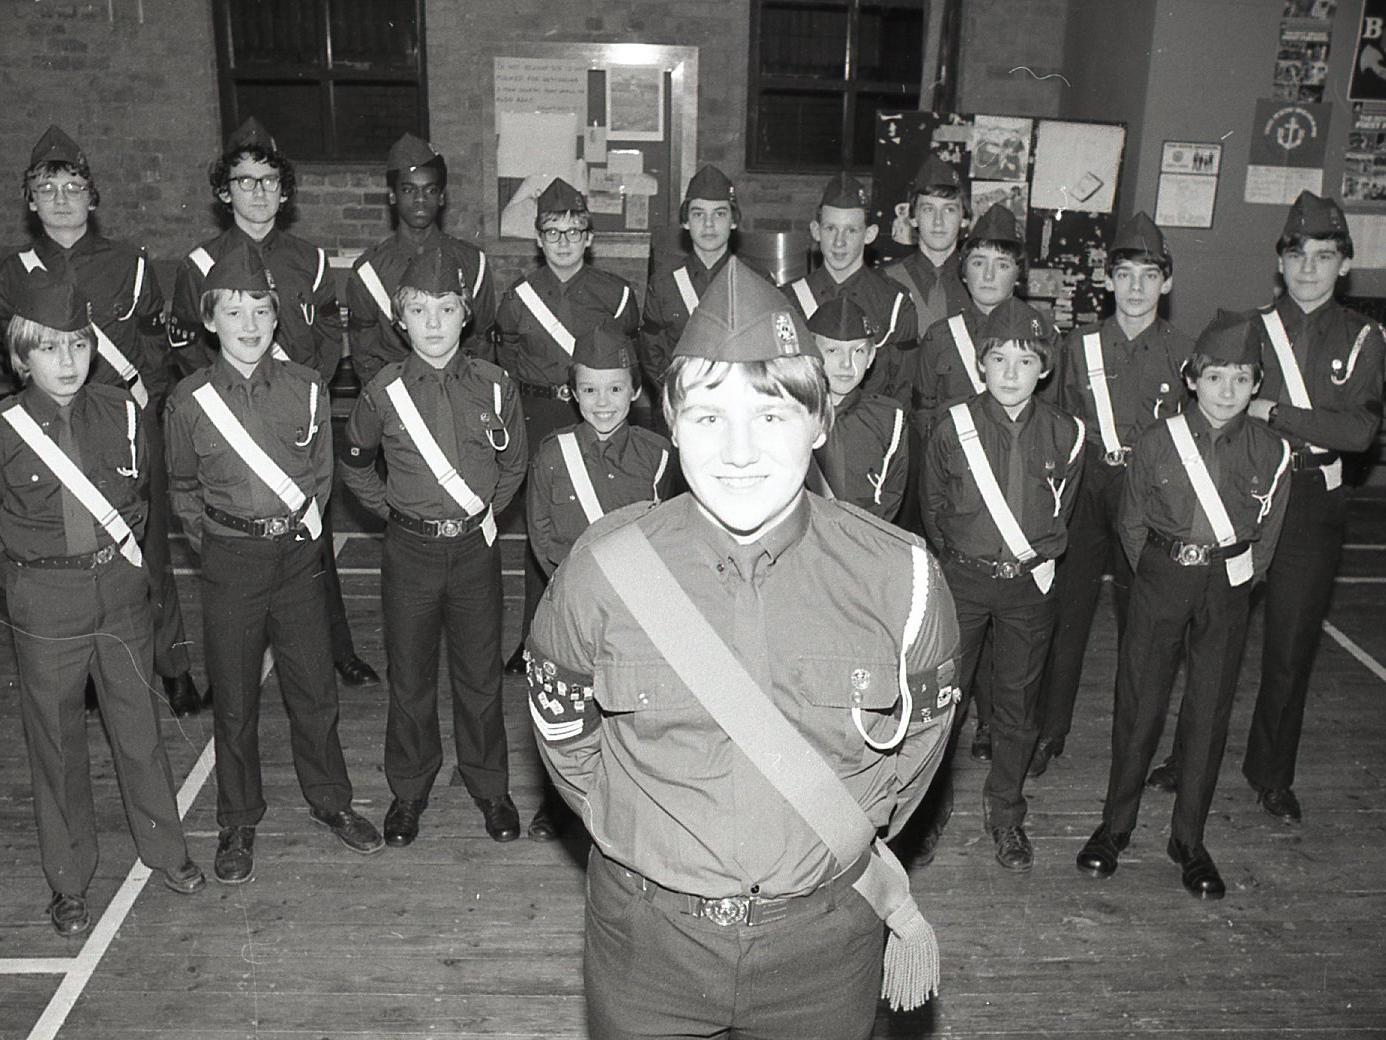 They form a 400,000 strong worldwide army of Christian soldiers who are planning a general salute to 1983 - the centenary year of the unit to which they belong - the Boys Brigade. Queen's Badge winner Colour Sgt Neil Sherry and boys of the 2nd Preston Company of the Boys Brigade on parade at their Carey Street Baptist Church headquarters, will join in those celebrations